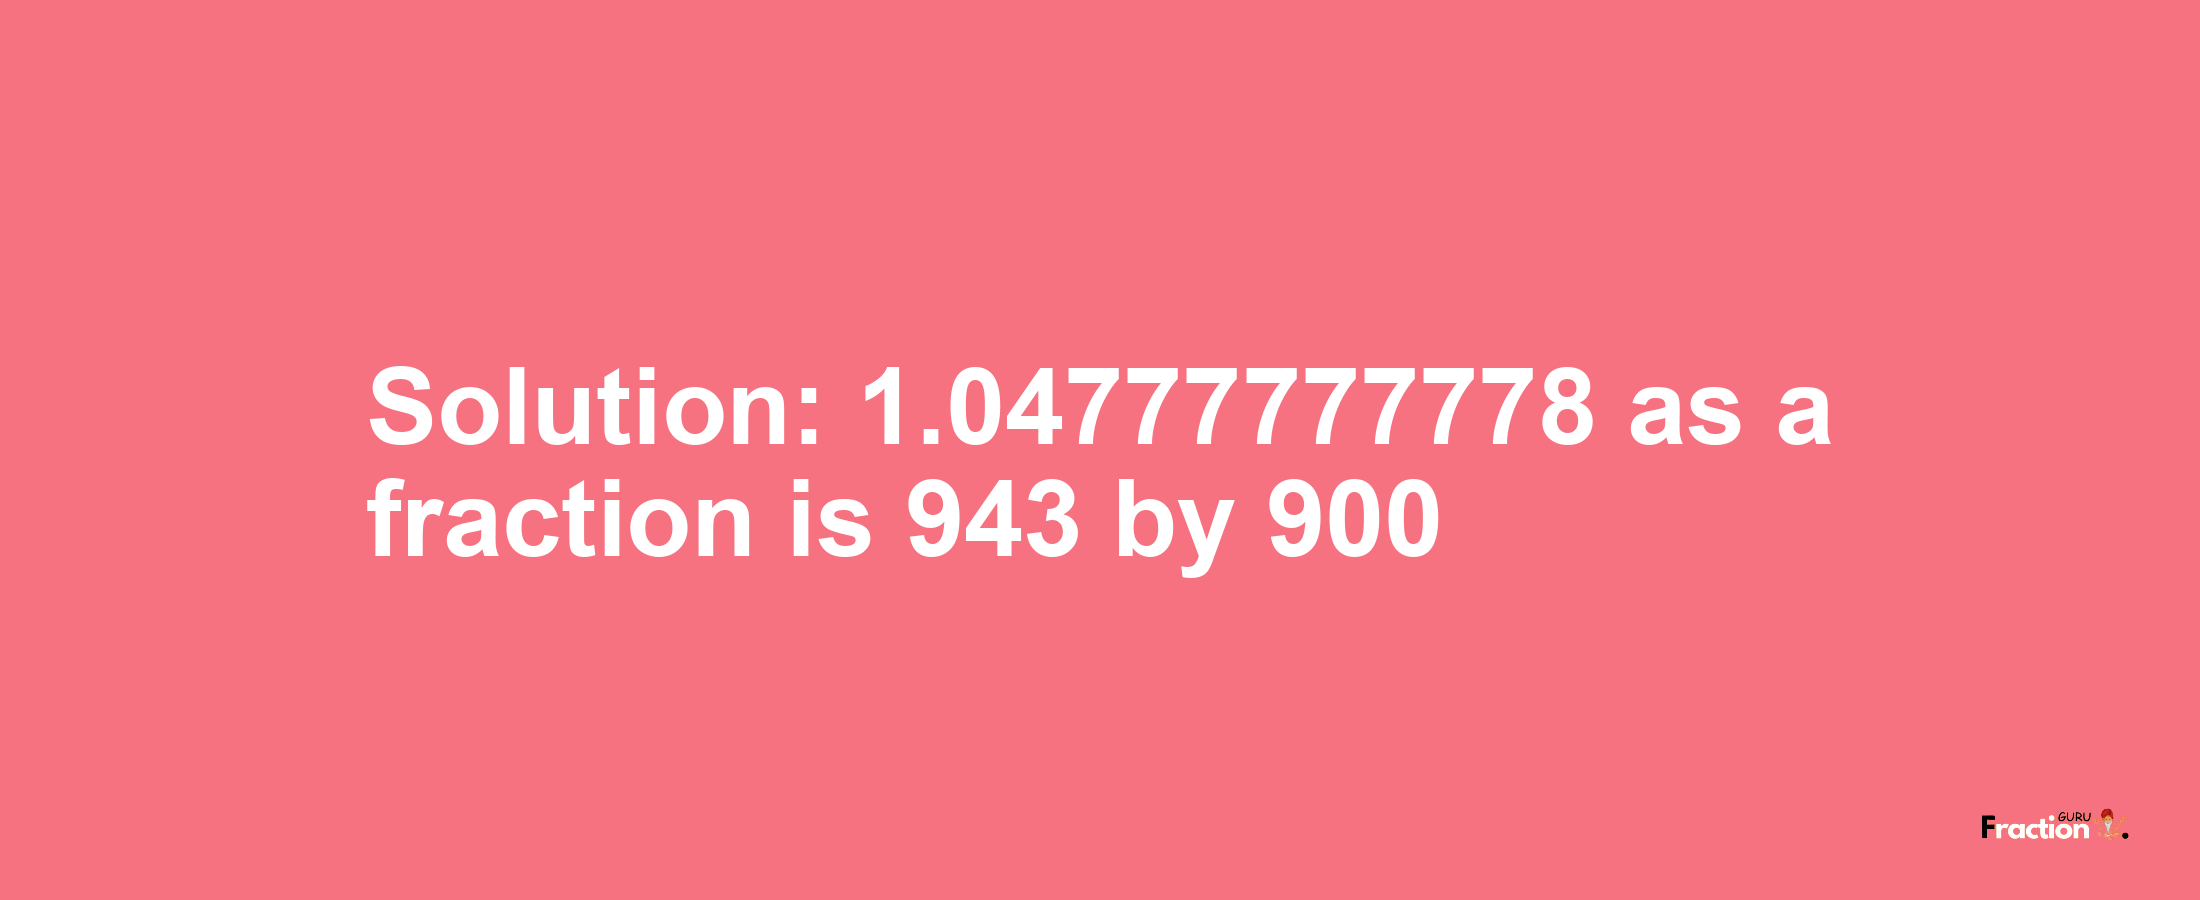 Solution:1.04777777778 as a fraction is 943/900